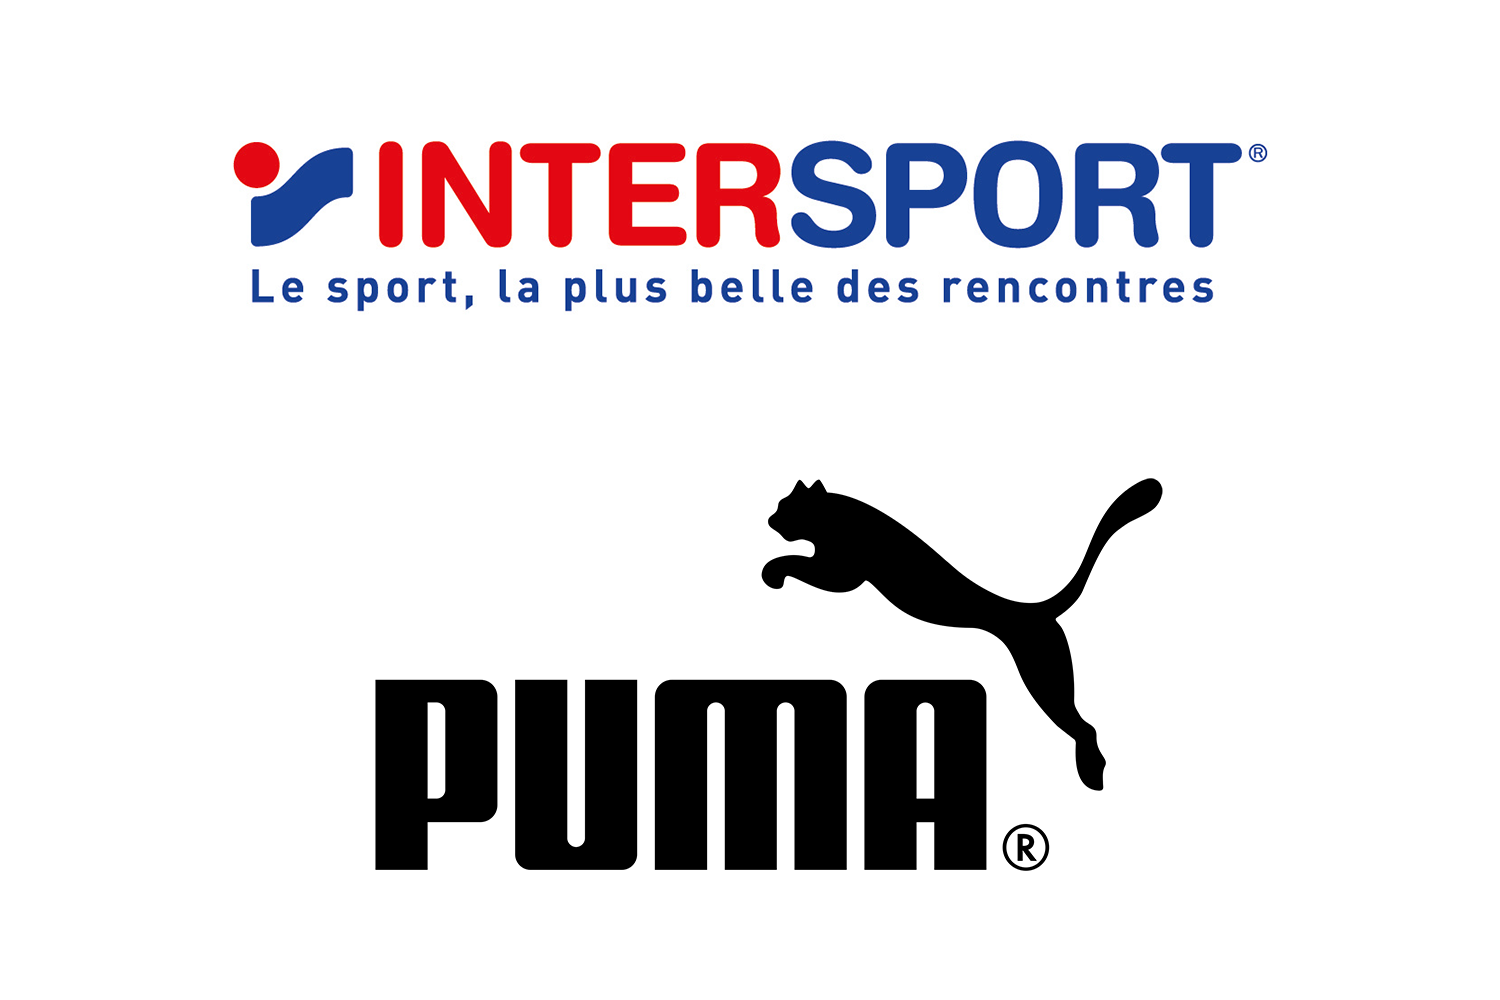 cráneo Pila de Pascua de Resurrección Puma launches made-in-France collection with Intersport | News briefs |  Sporting Goods Intelligence